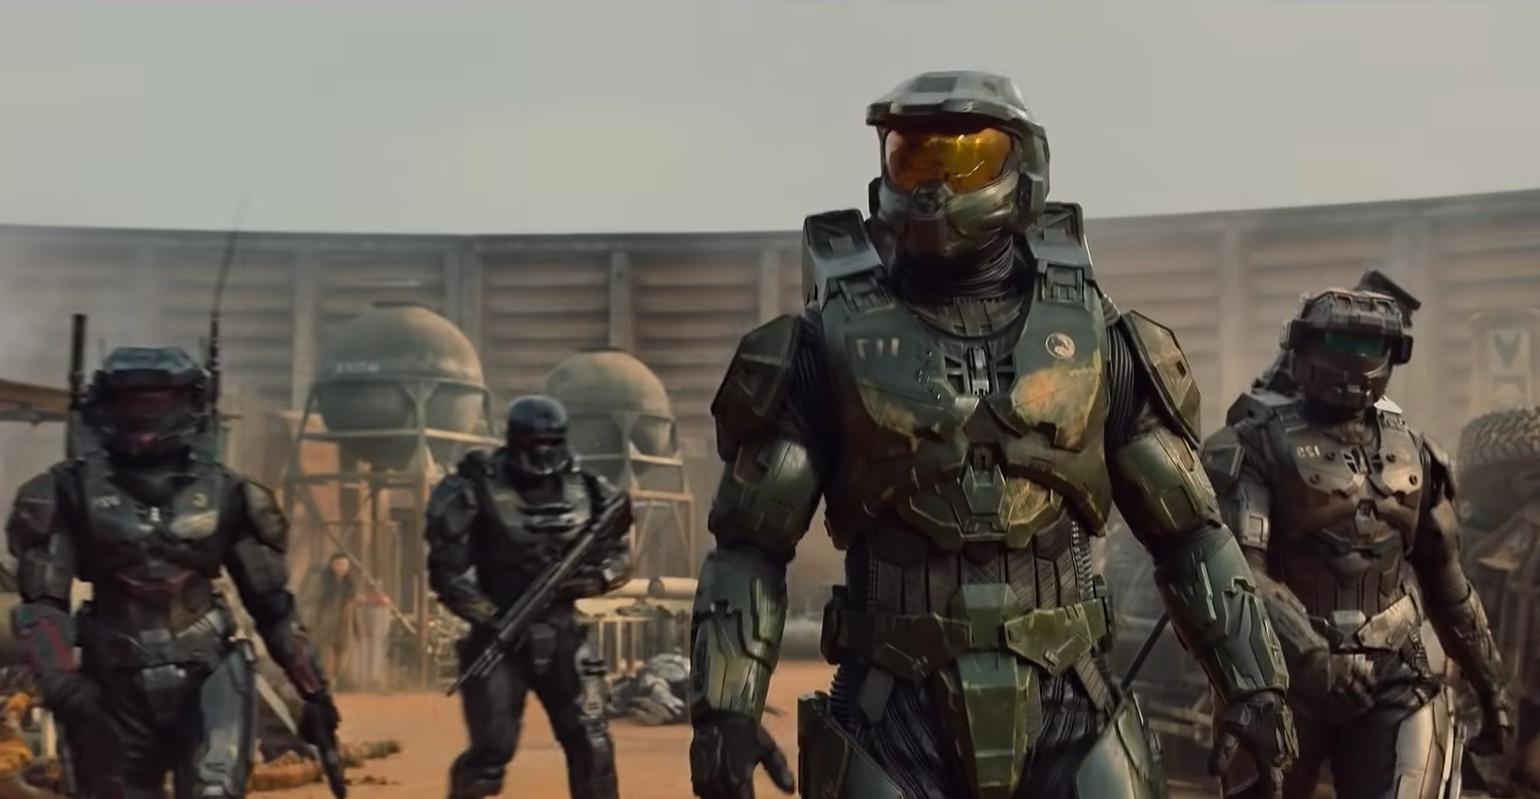 Halo TV series' debut gets mixed reviews but retains 'fresh